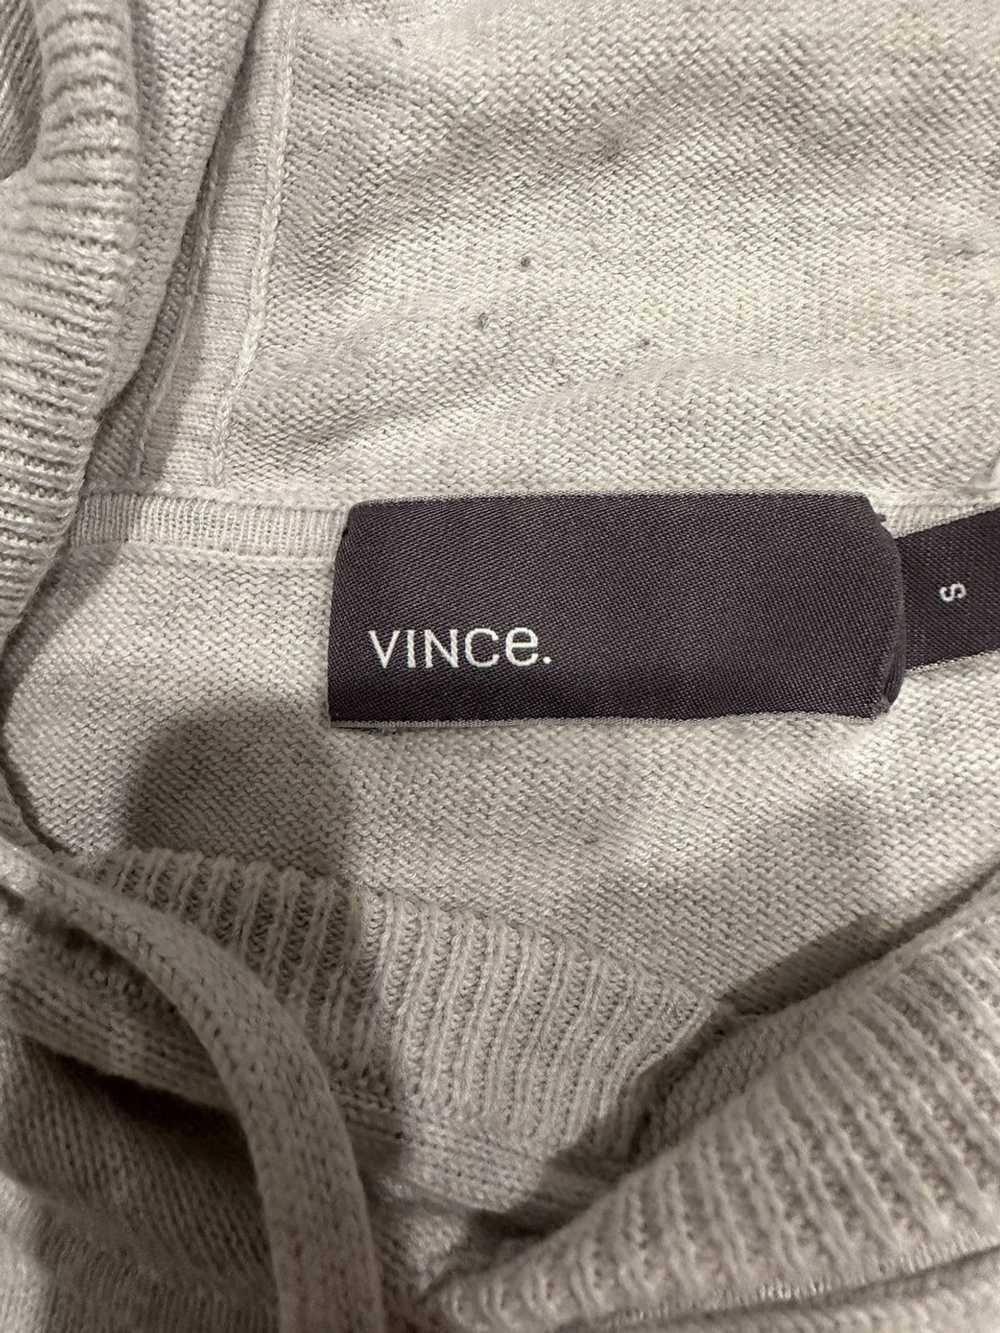 Vince Vince grey striped classy hoodie - image 2